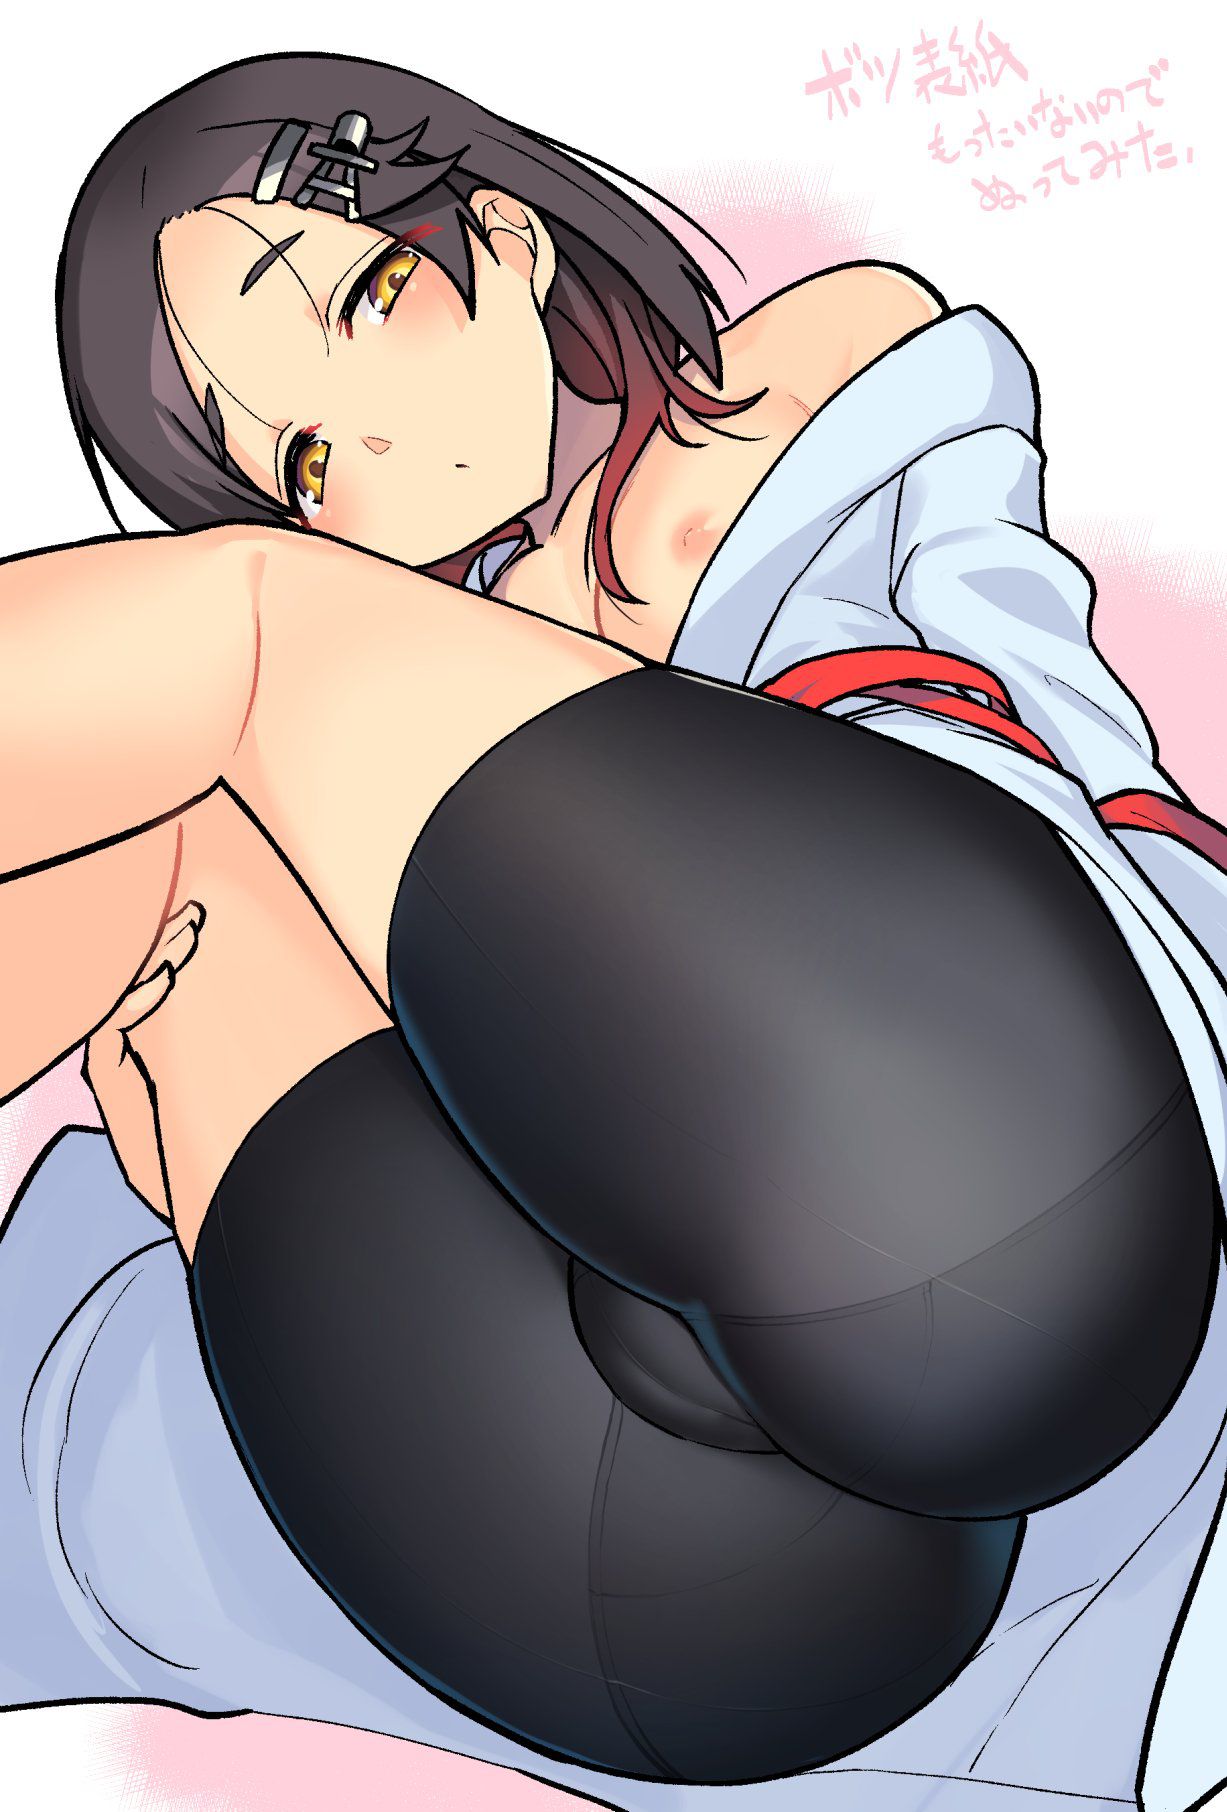 Gather who wants to shiko in erotic image of thighs! 19